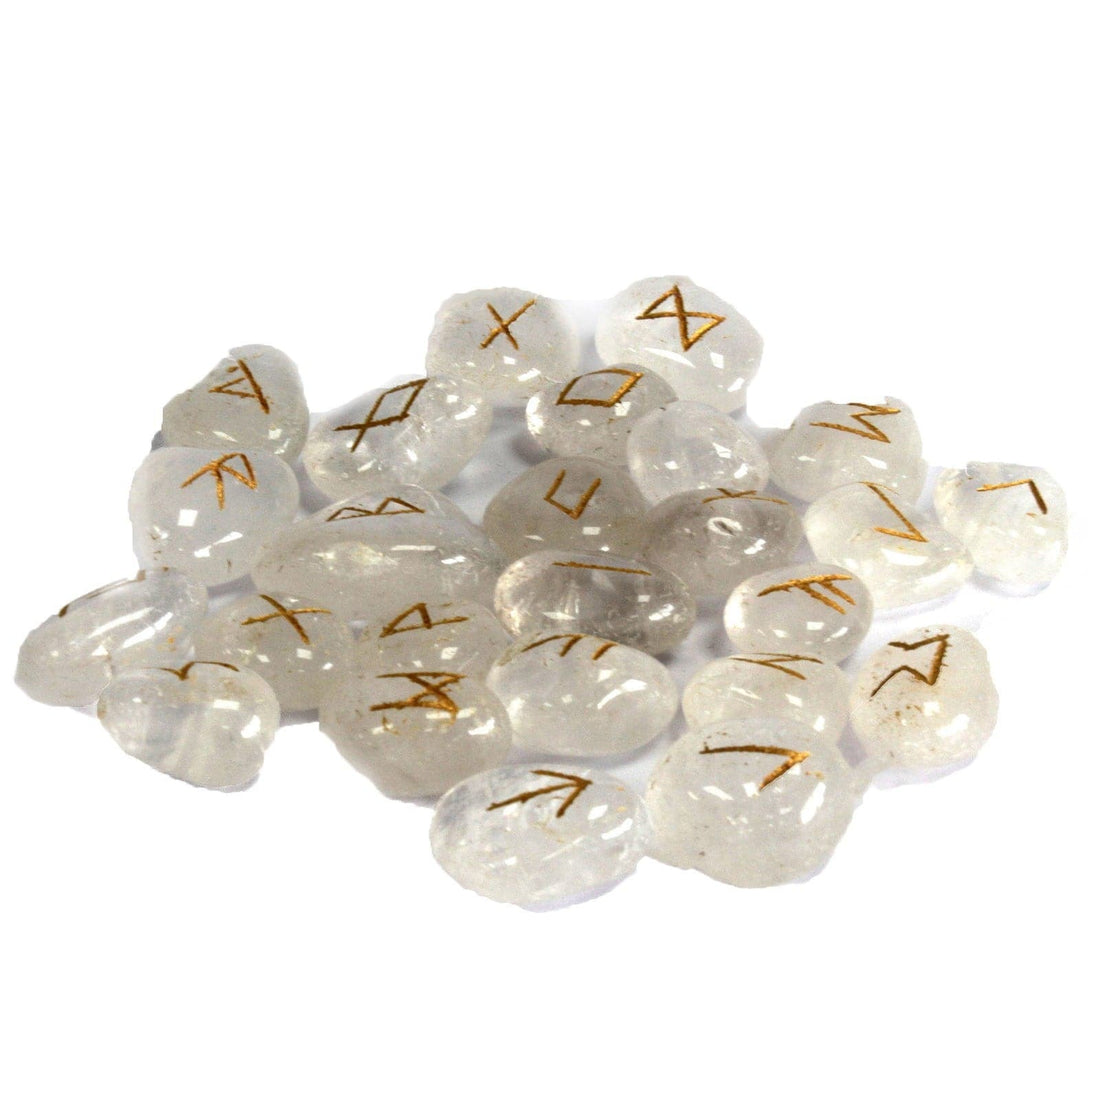 Indian Runes in Pouch - Crystal - best price from Maltashopper.com RUNE-33